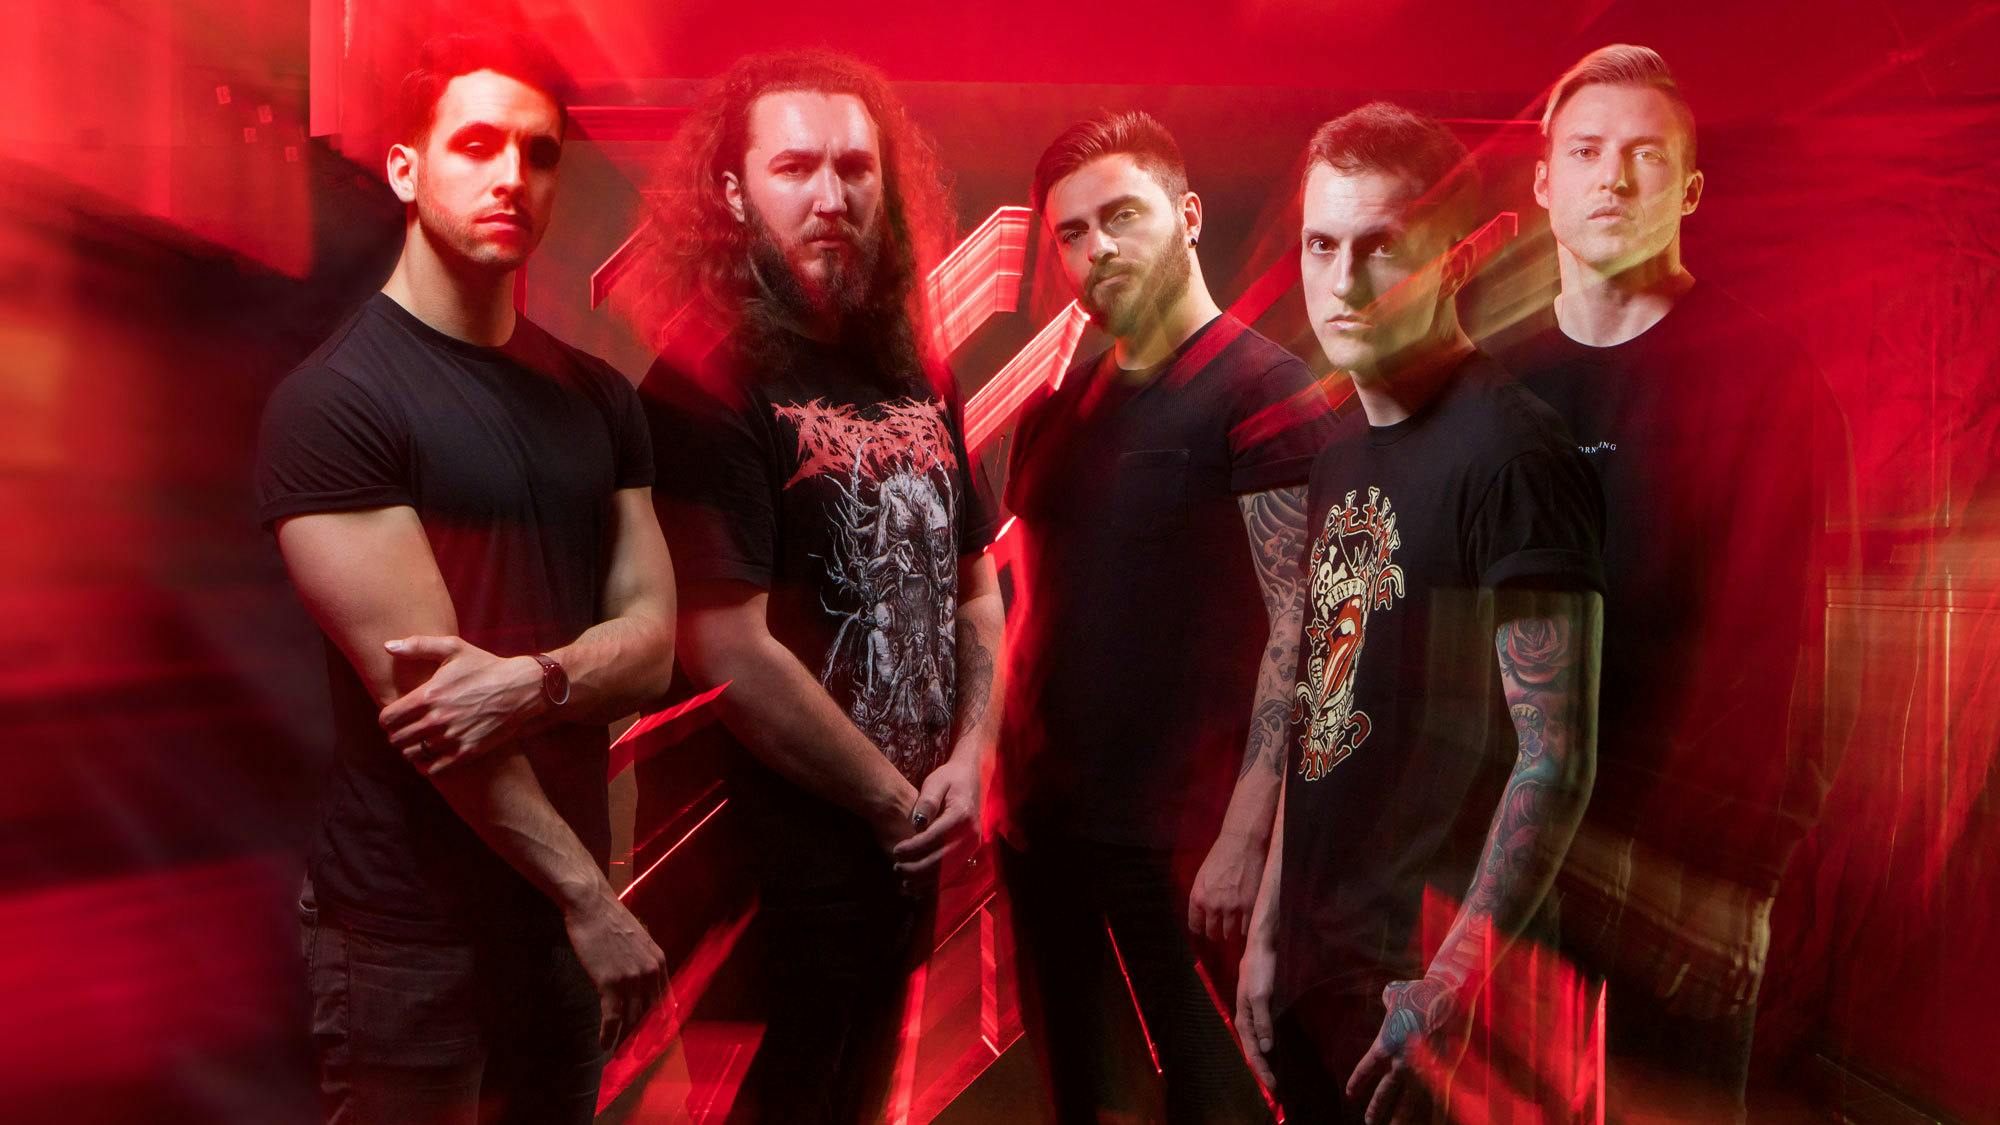 I Prevail: "People Are Going To Have To Start Accepting This New Genre"